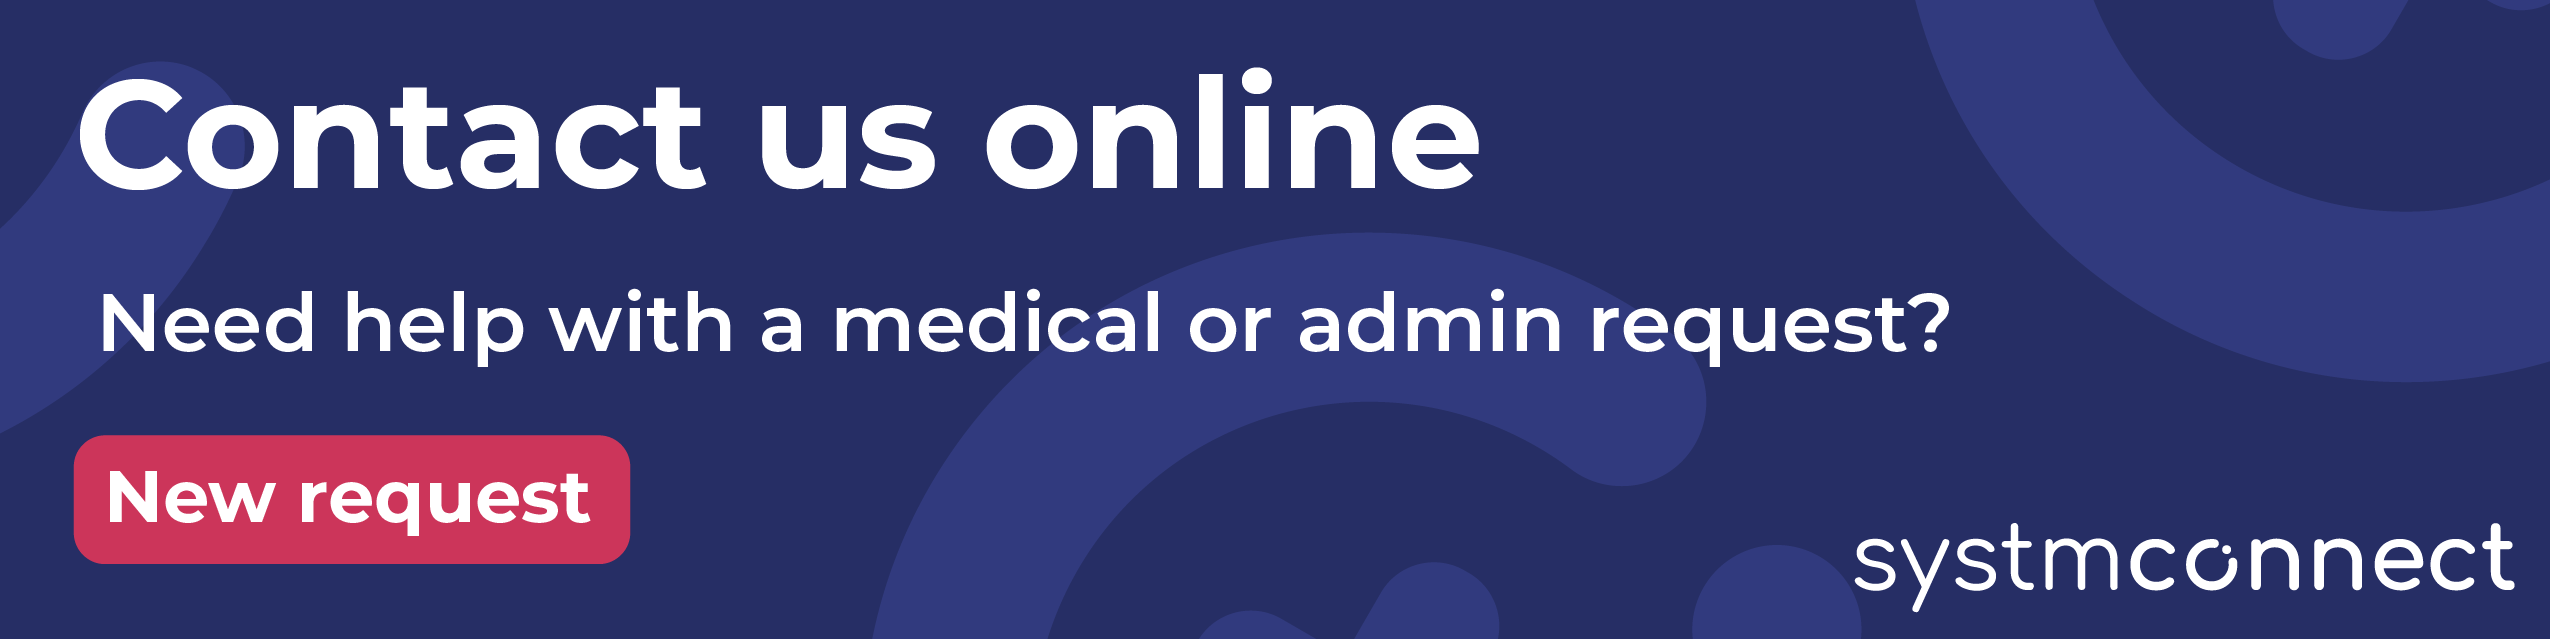 Contact us online. Need help with a medical or admin request? Submit a new request.